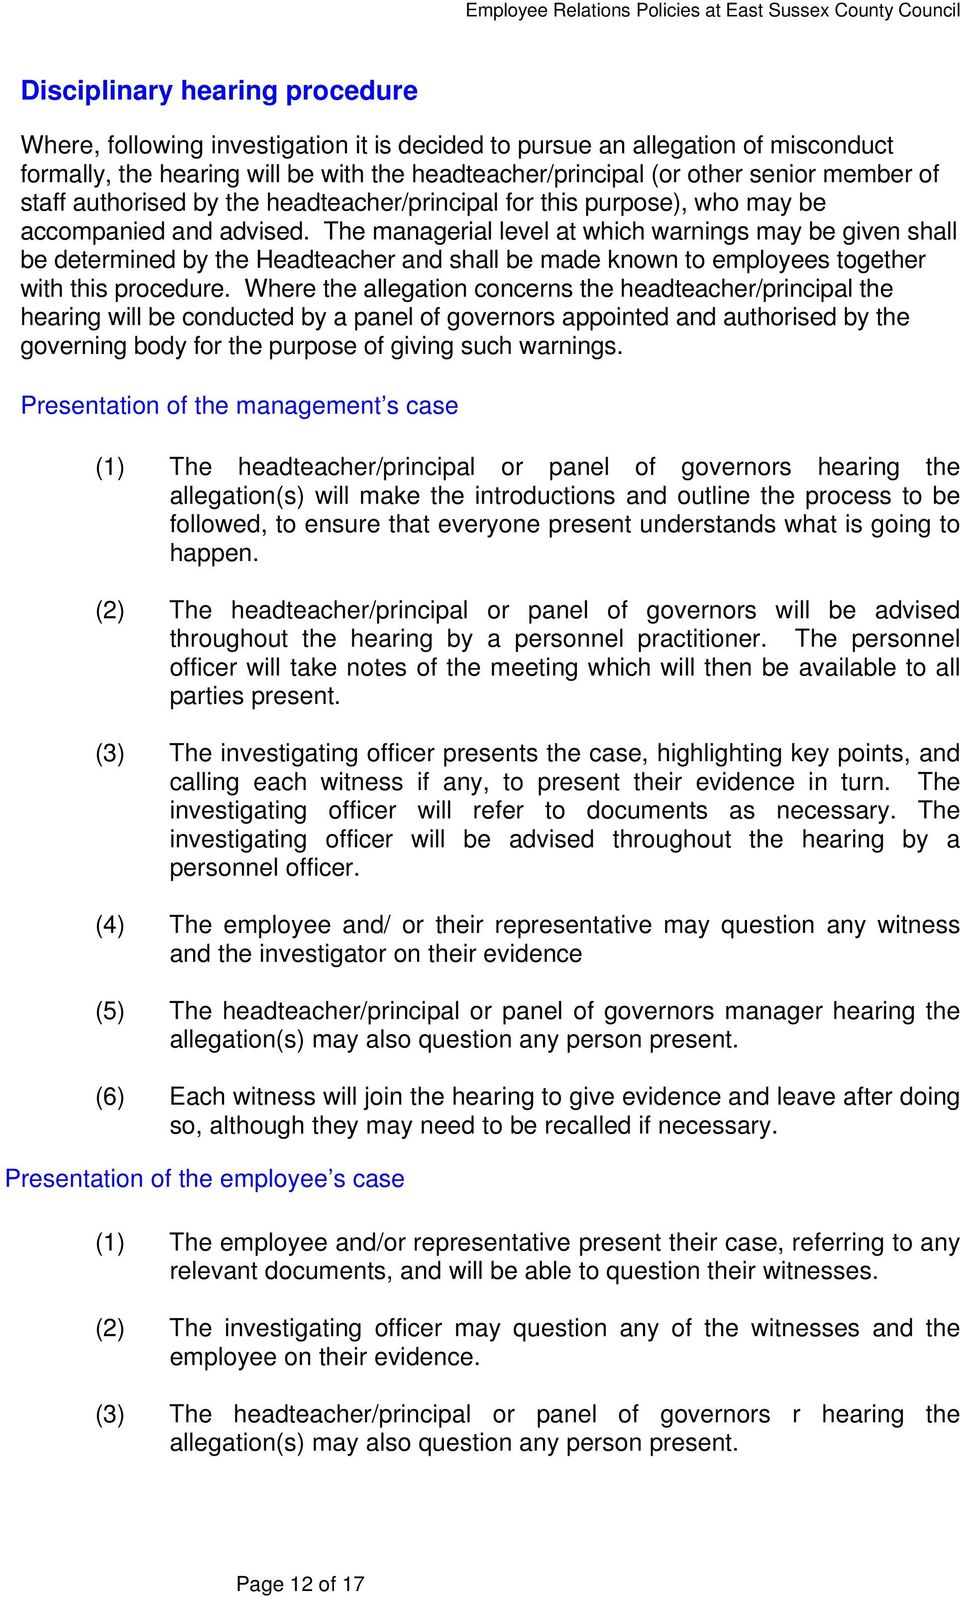 The managerial level at which warnings may be given shall be determined by the Headteacher and shall be made known to employees together with this procedure.